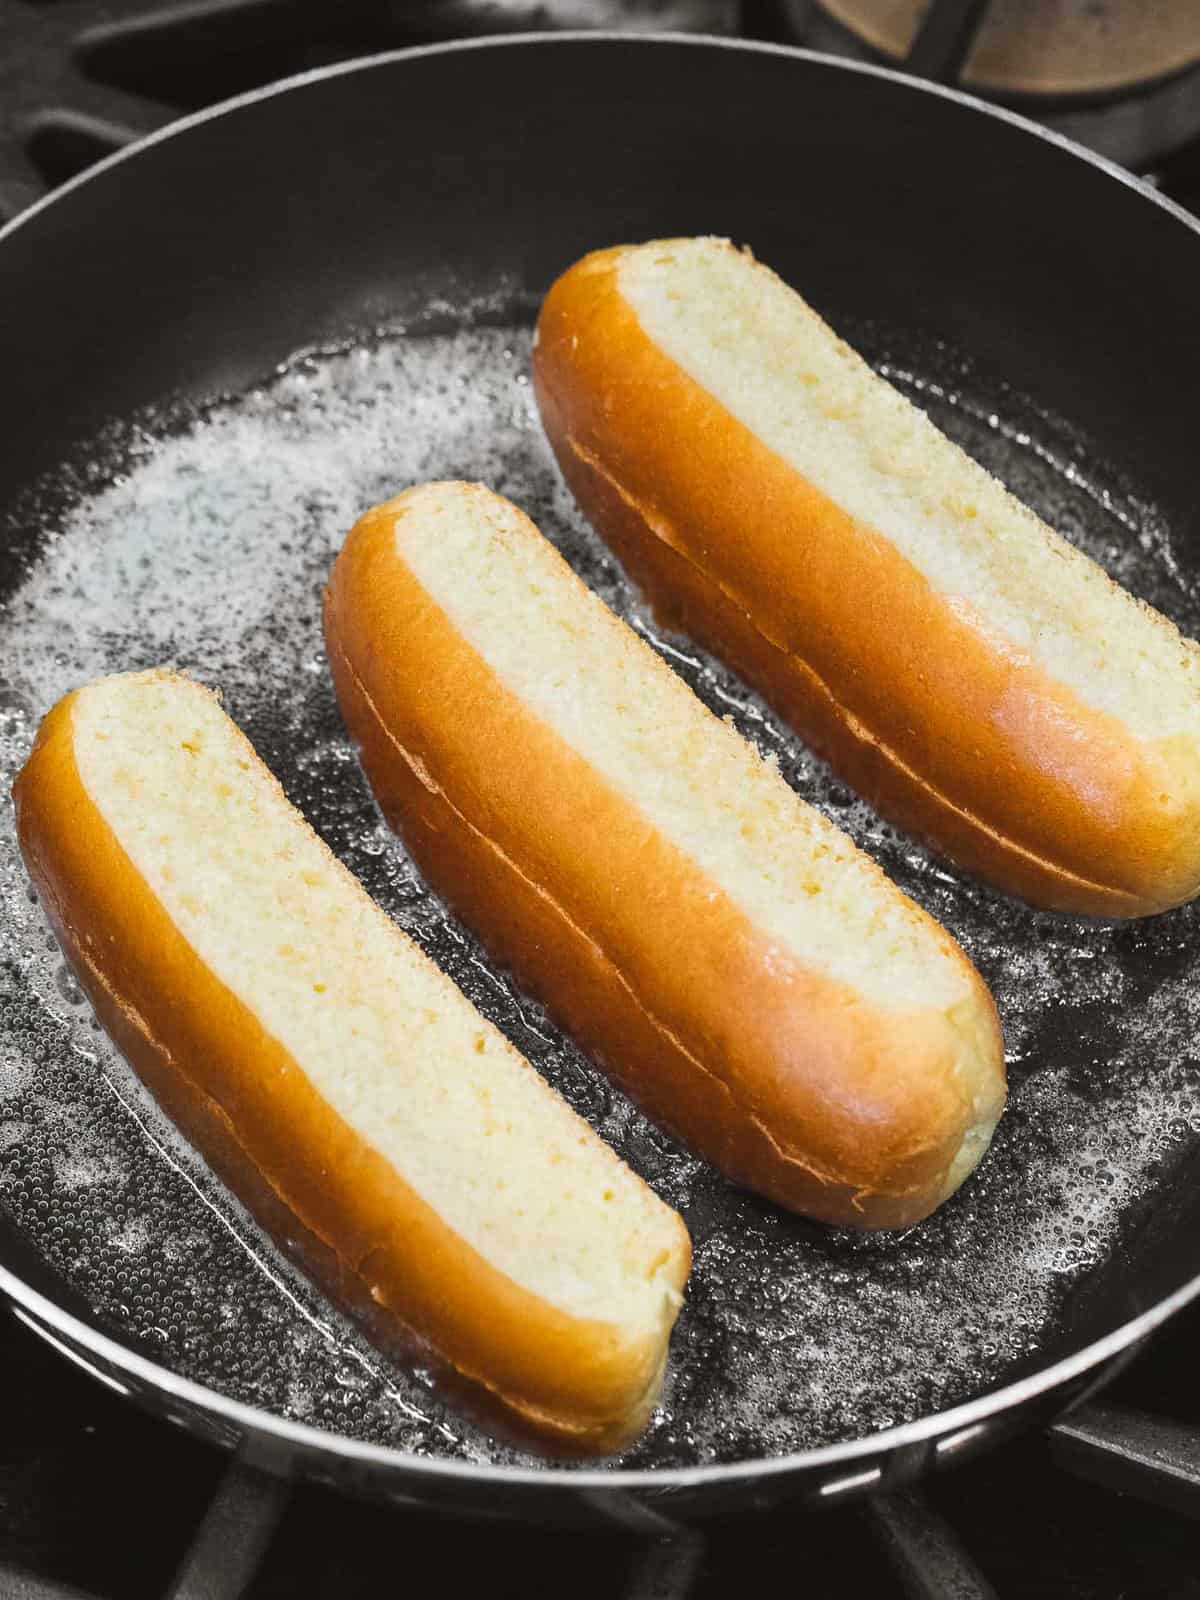 Hot dog buns toasting with melted butter.